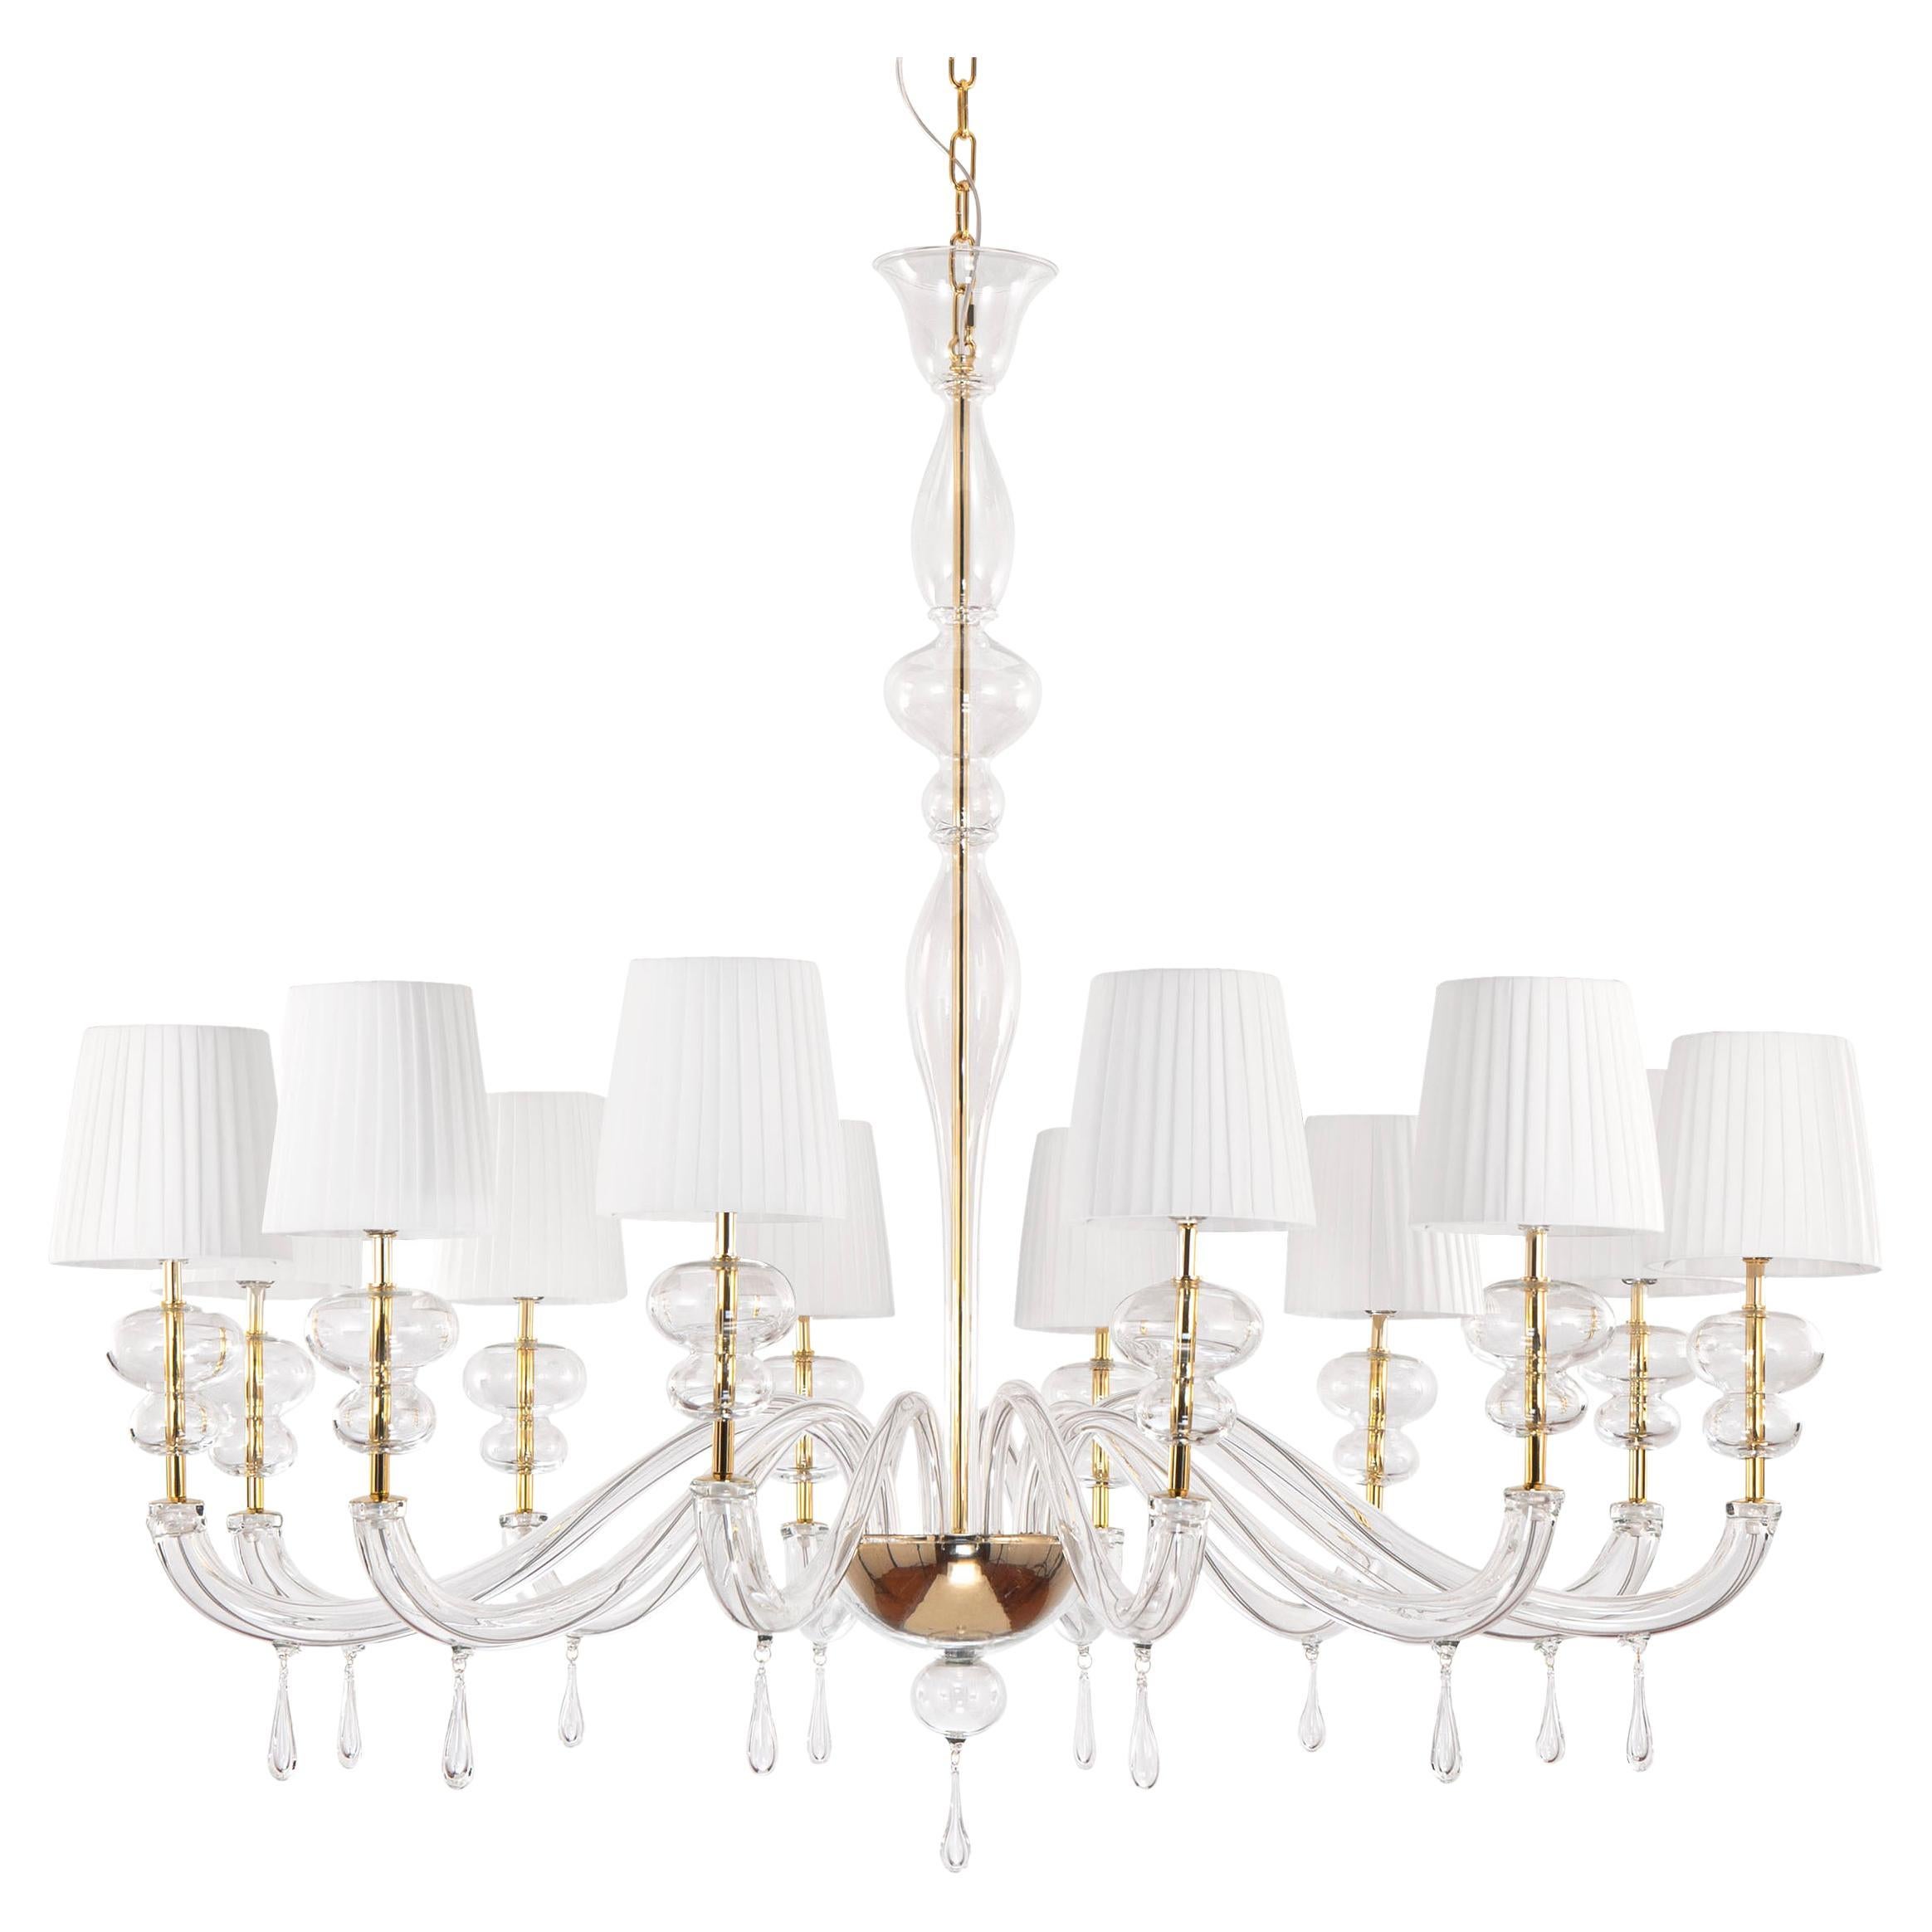 Modern Chandelier 12 Lights Crystal Murano Glass, White Lampshades by Multiforme For Sale